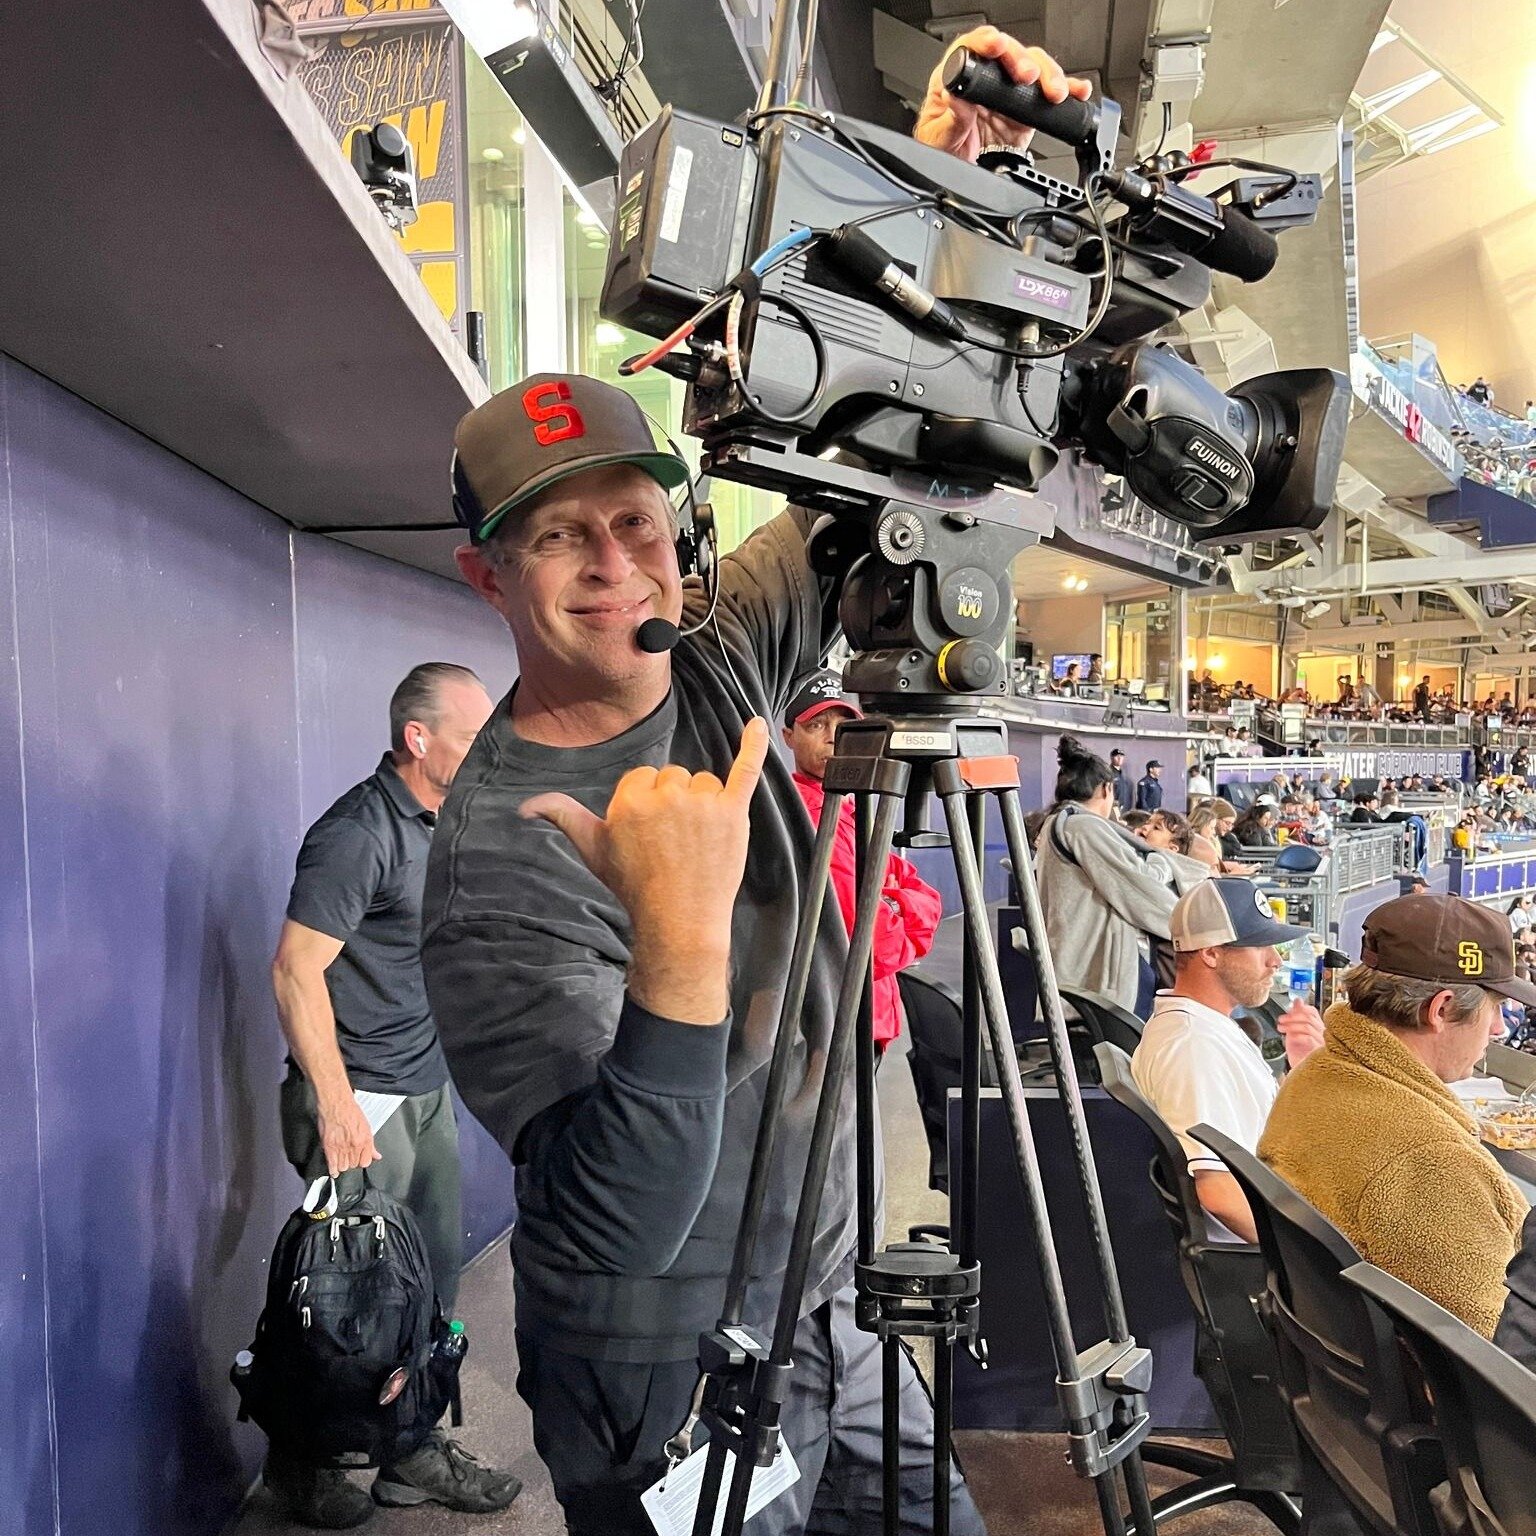 Say 👋 to one of our RF camera operators and long-time #Local795 member, Dave D.! #FunFact: An average broadcast with the Padres and visiting team combined uses 27 cameras (including robo cams), with 13 ops.

#iatse #padres #baseball #cams #cam #came